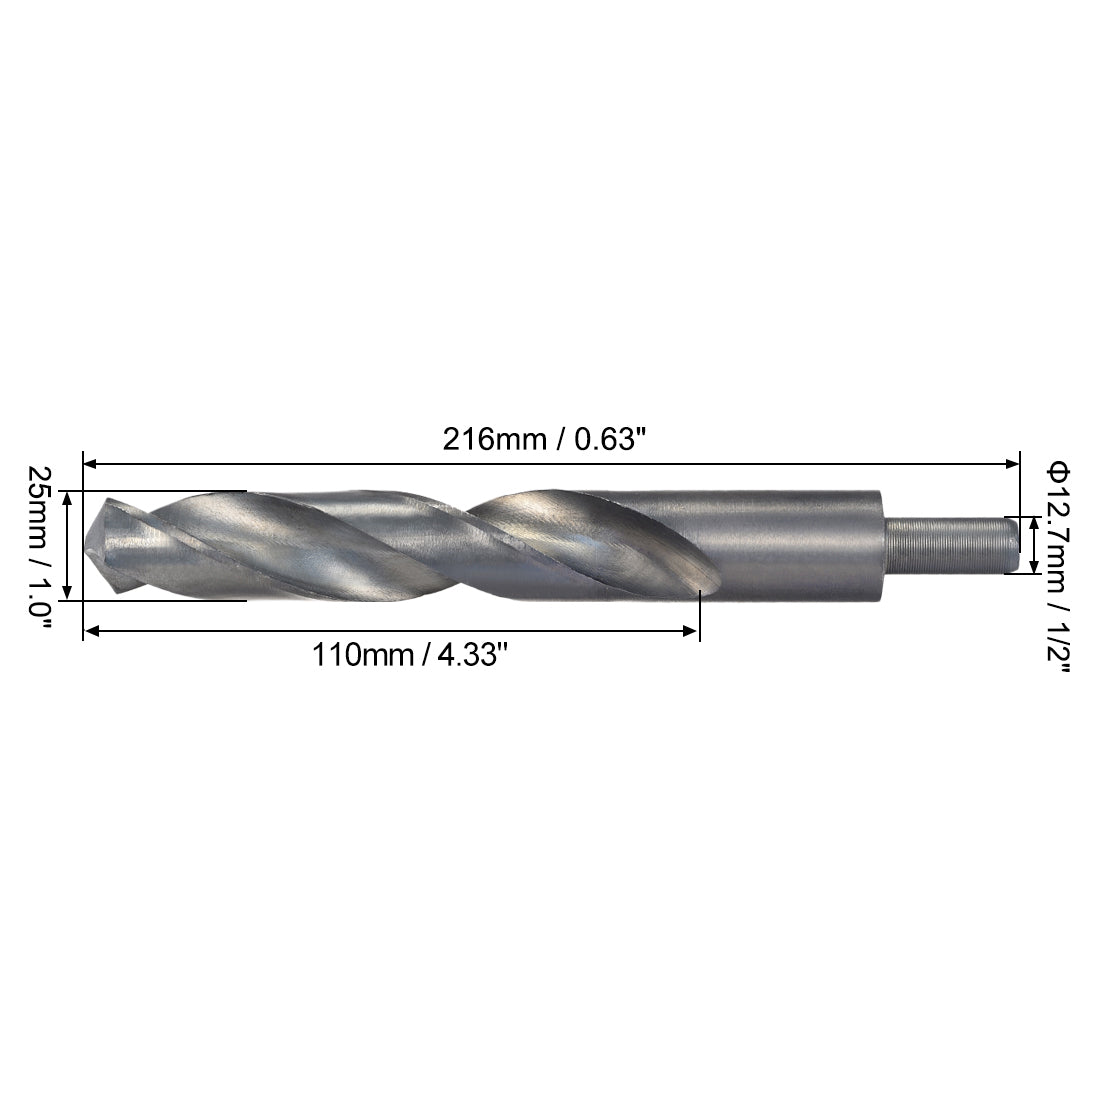 Uxcell Uxcell Reduced Shank Twist Drill Bits 25mm HSS 4241 with 1/2 Inch Shank 1 Pcs